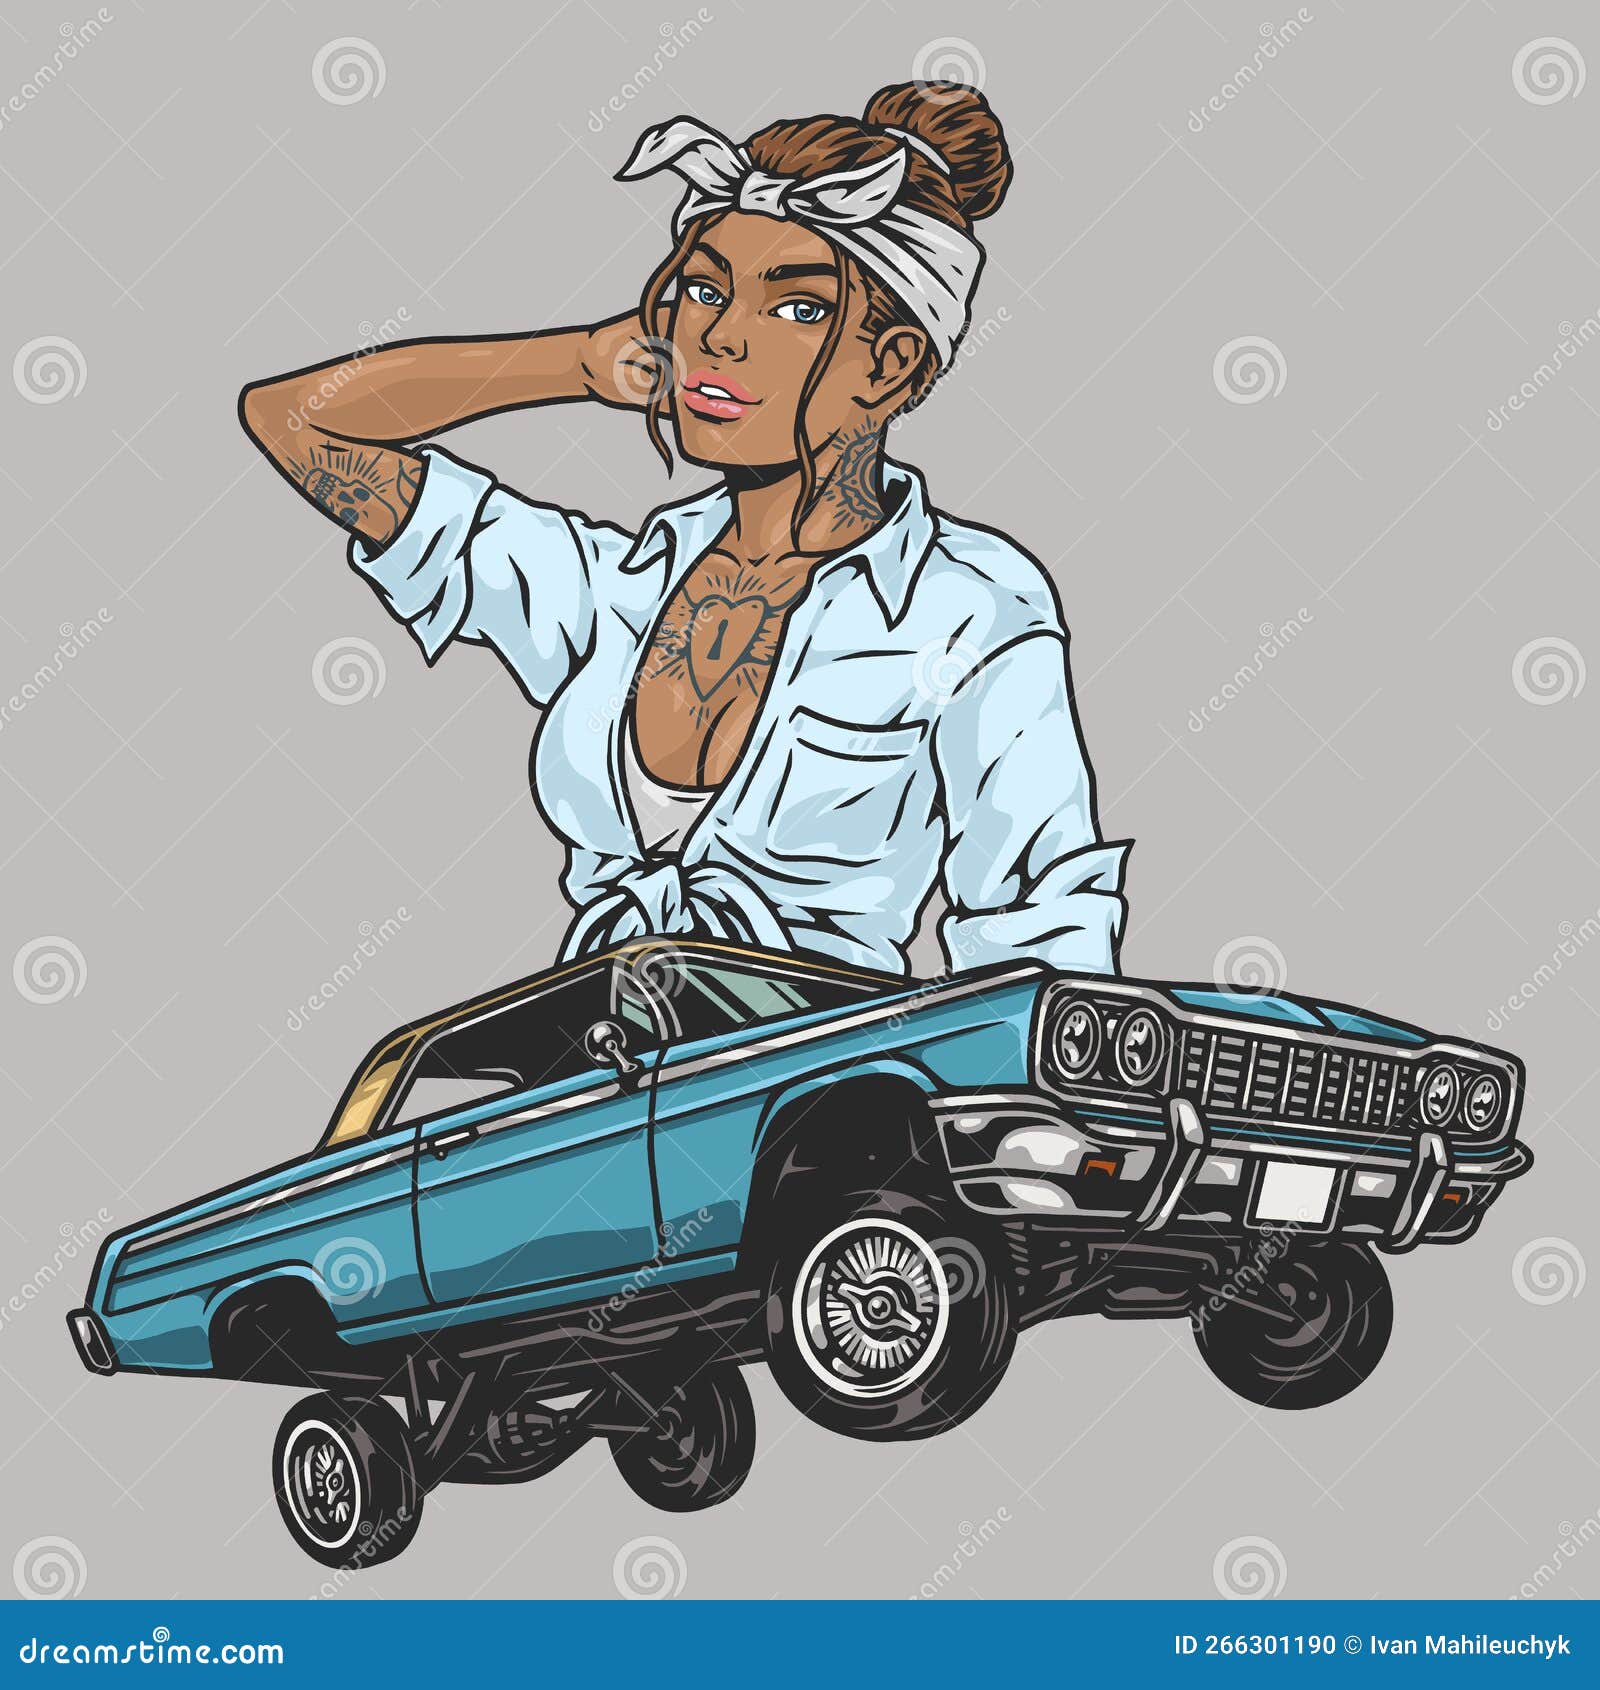 Subculture Lowrider Girl Colorful Emblem Vector Illustration ...